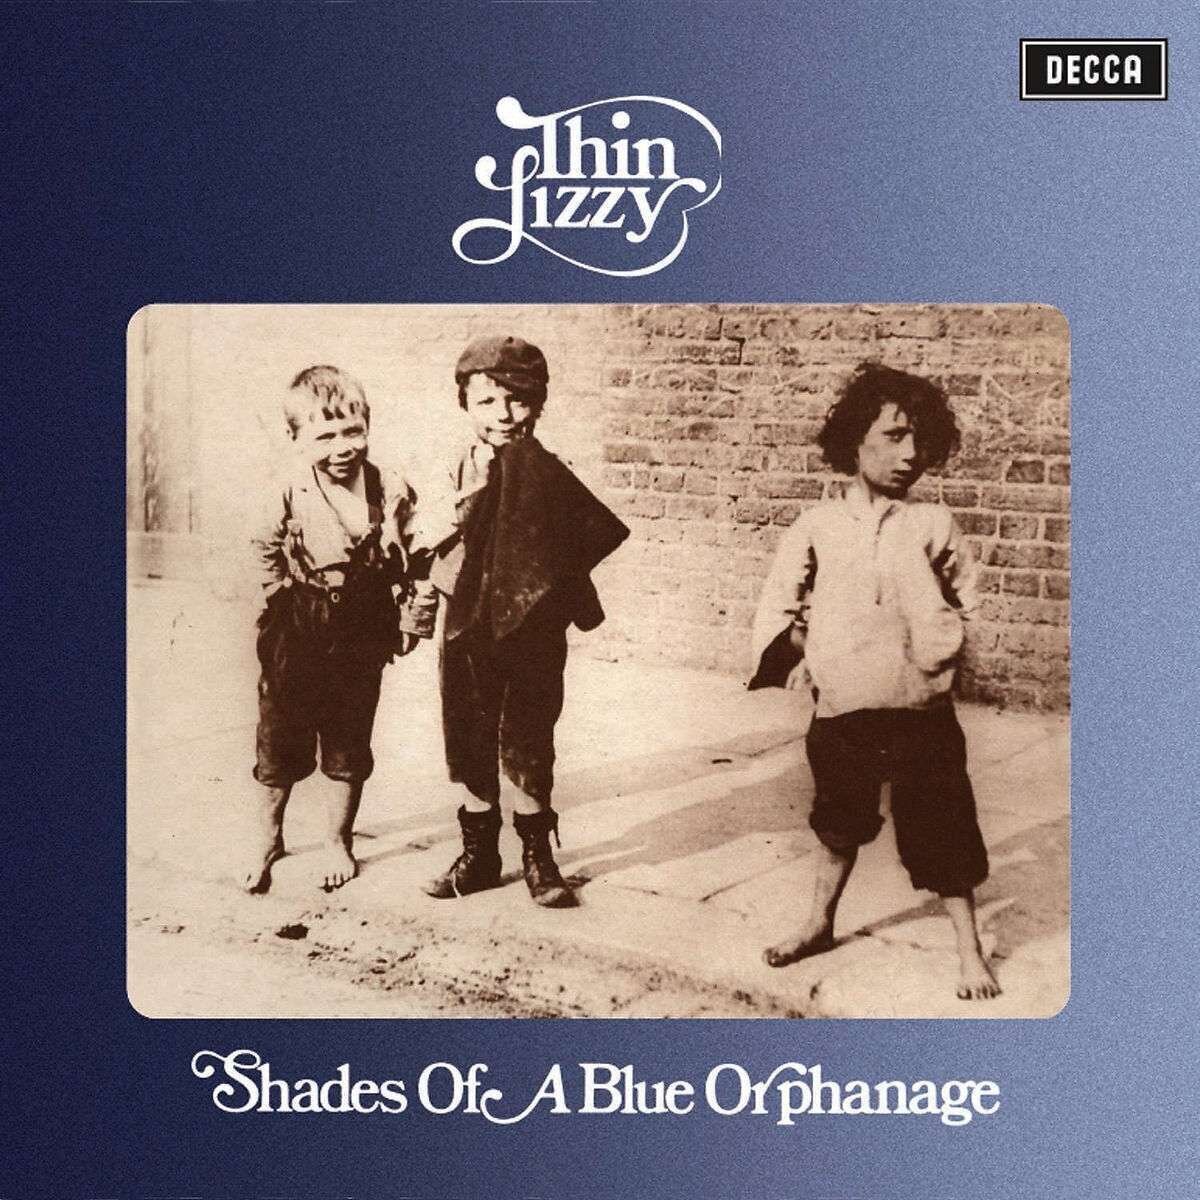 Glasbene CD Thin Lizzy - Shades Of A Blue Orphanage (Reissue) (CD)